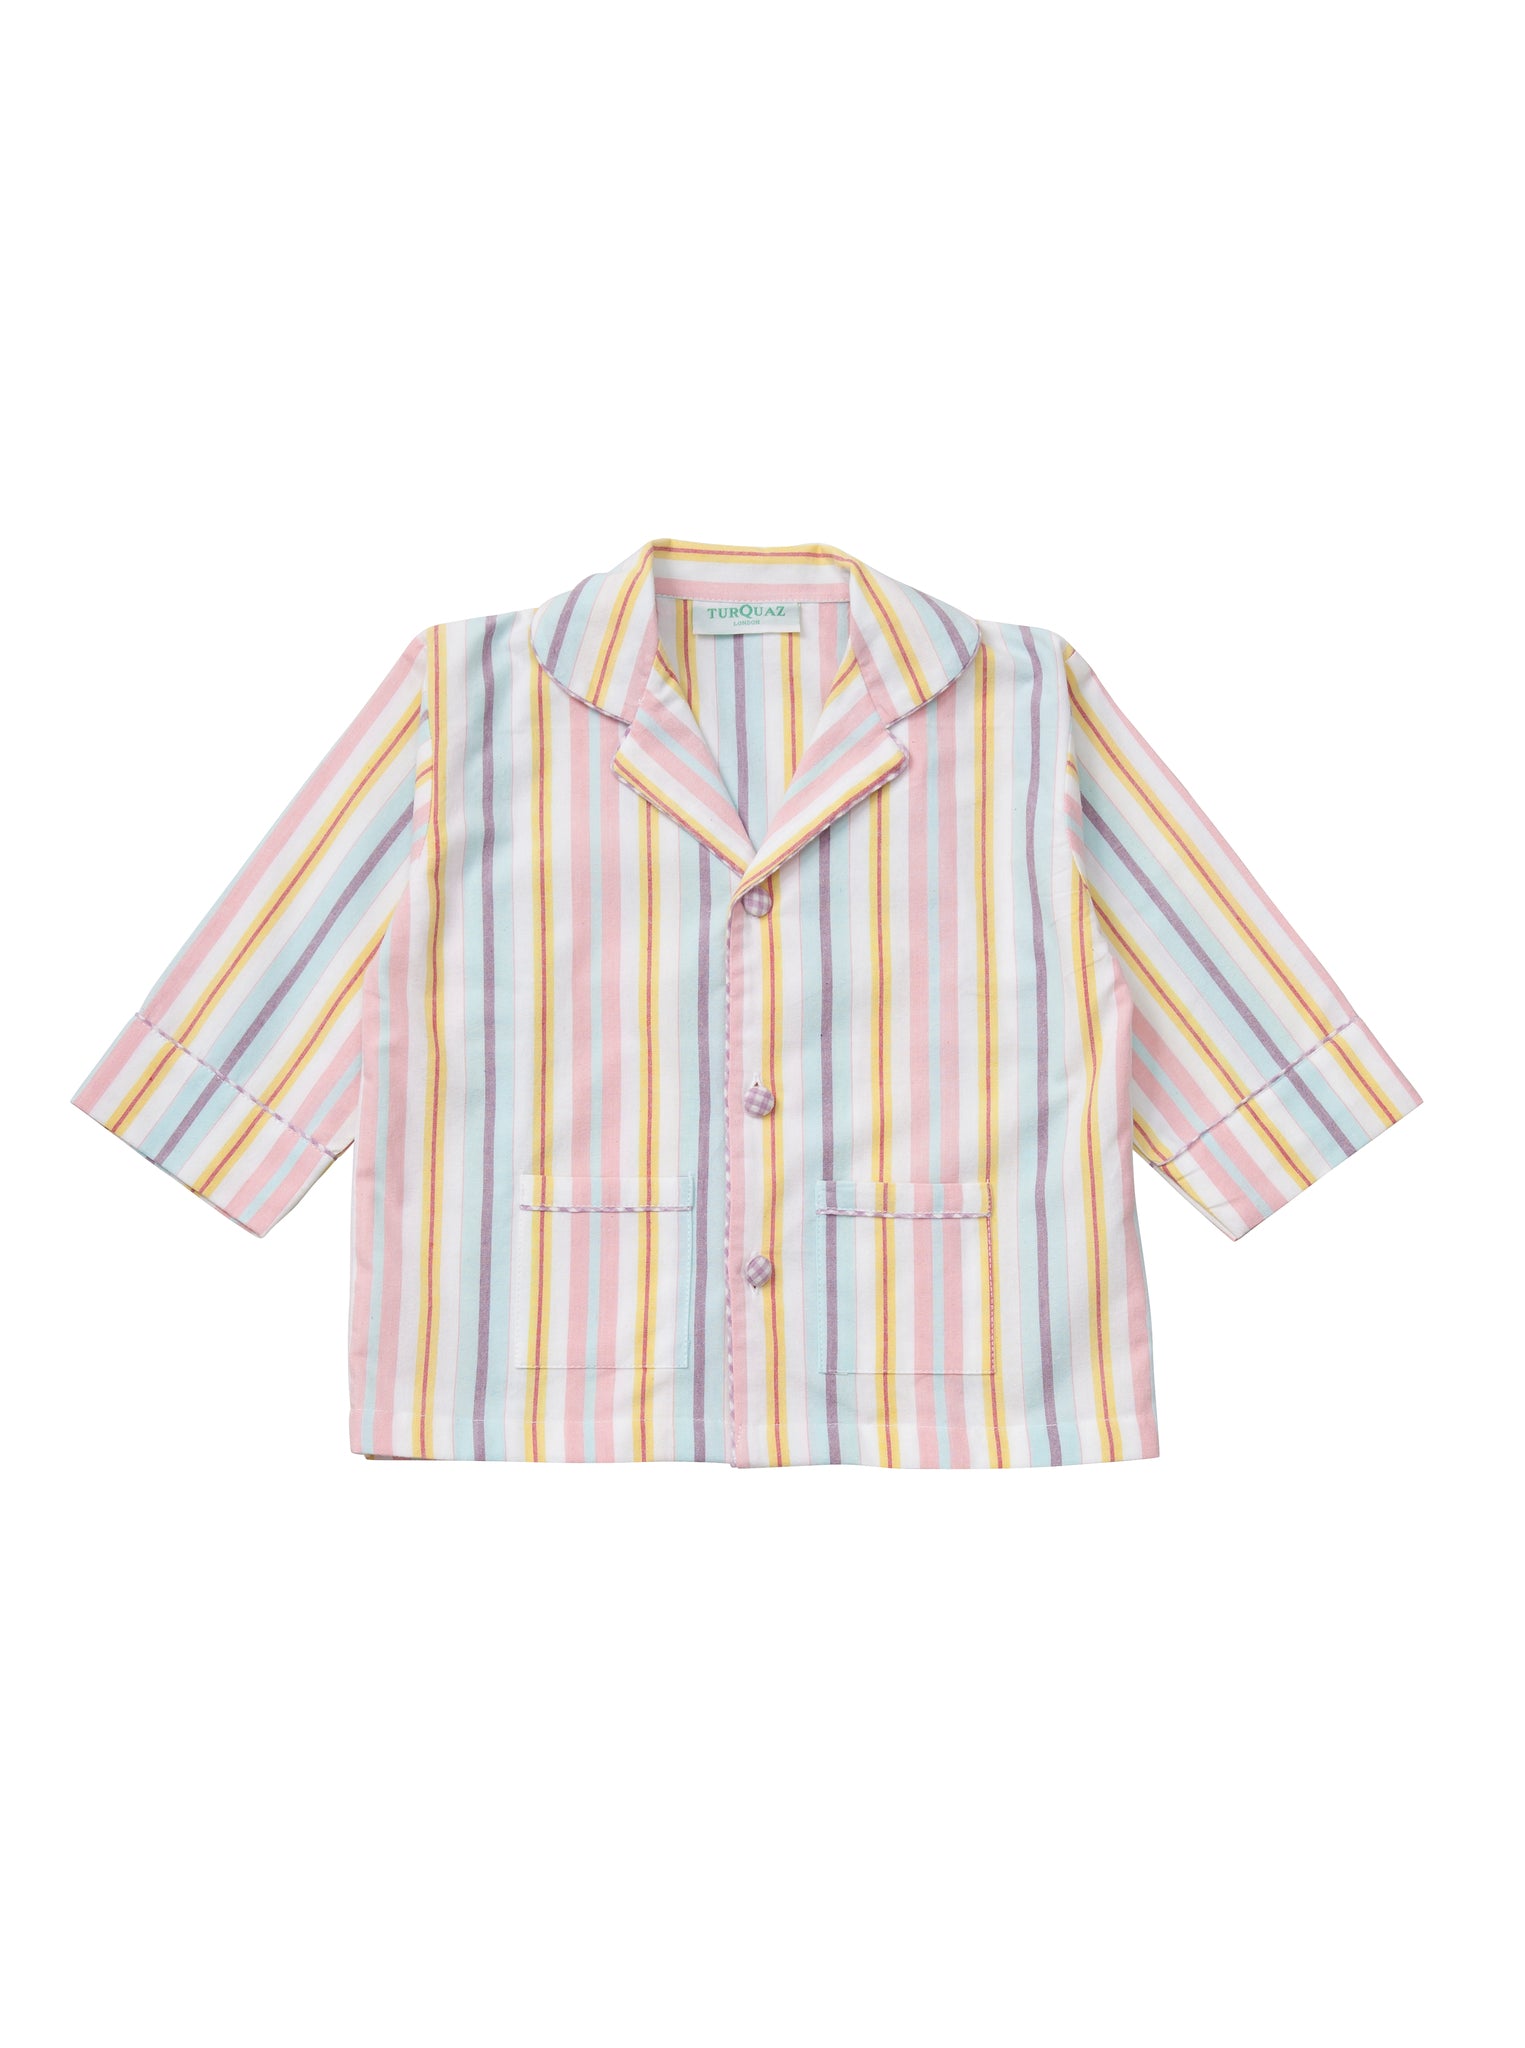 Cotton candy and all things nice, these stripe cotton pyjamas suit all children. From Turquaz. Top front.